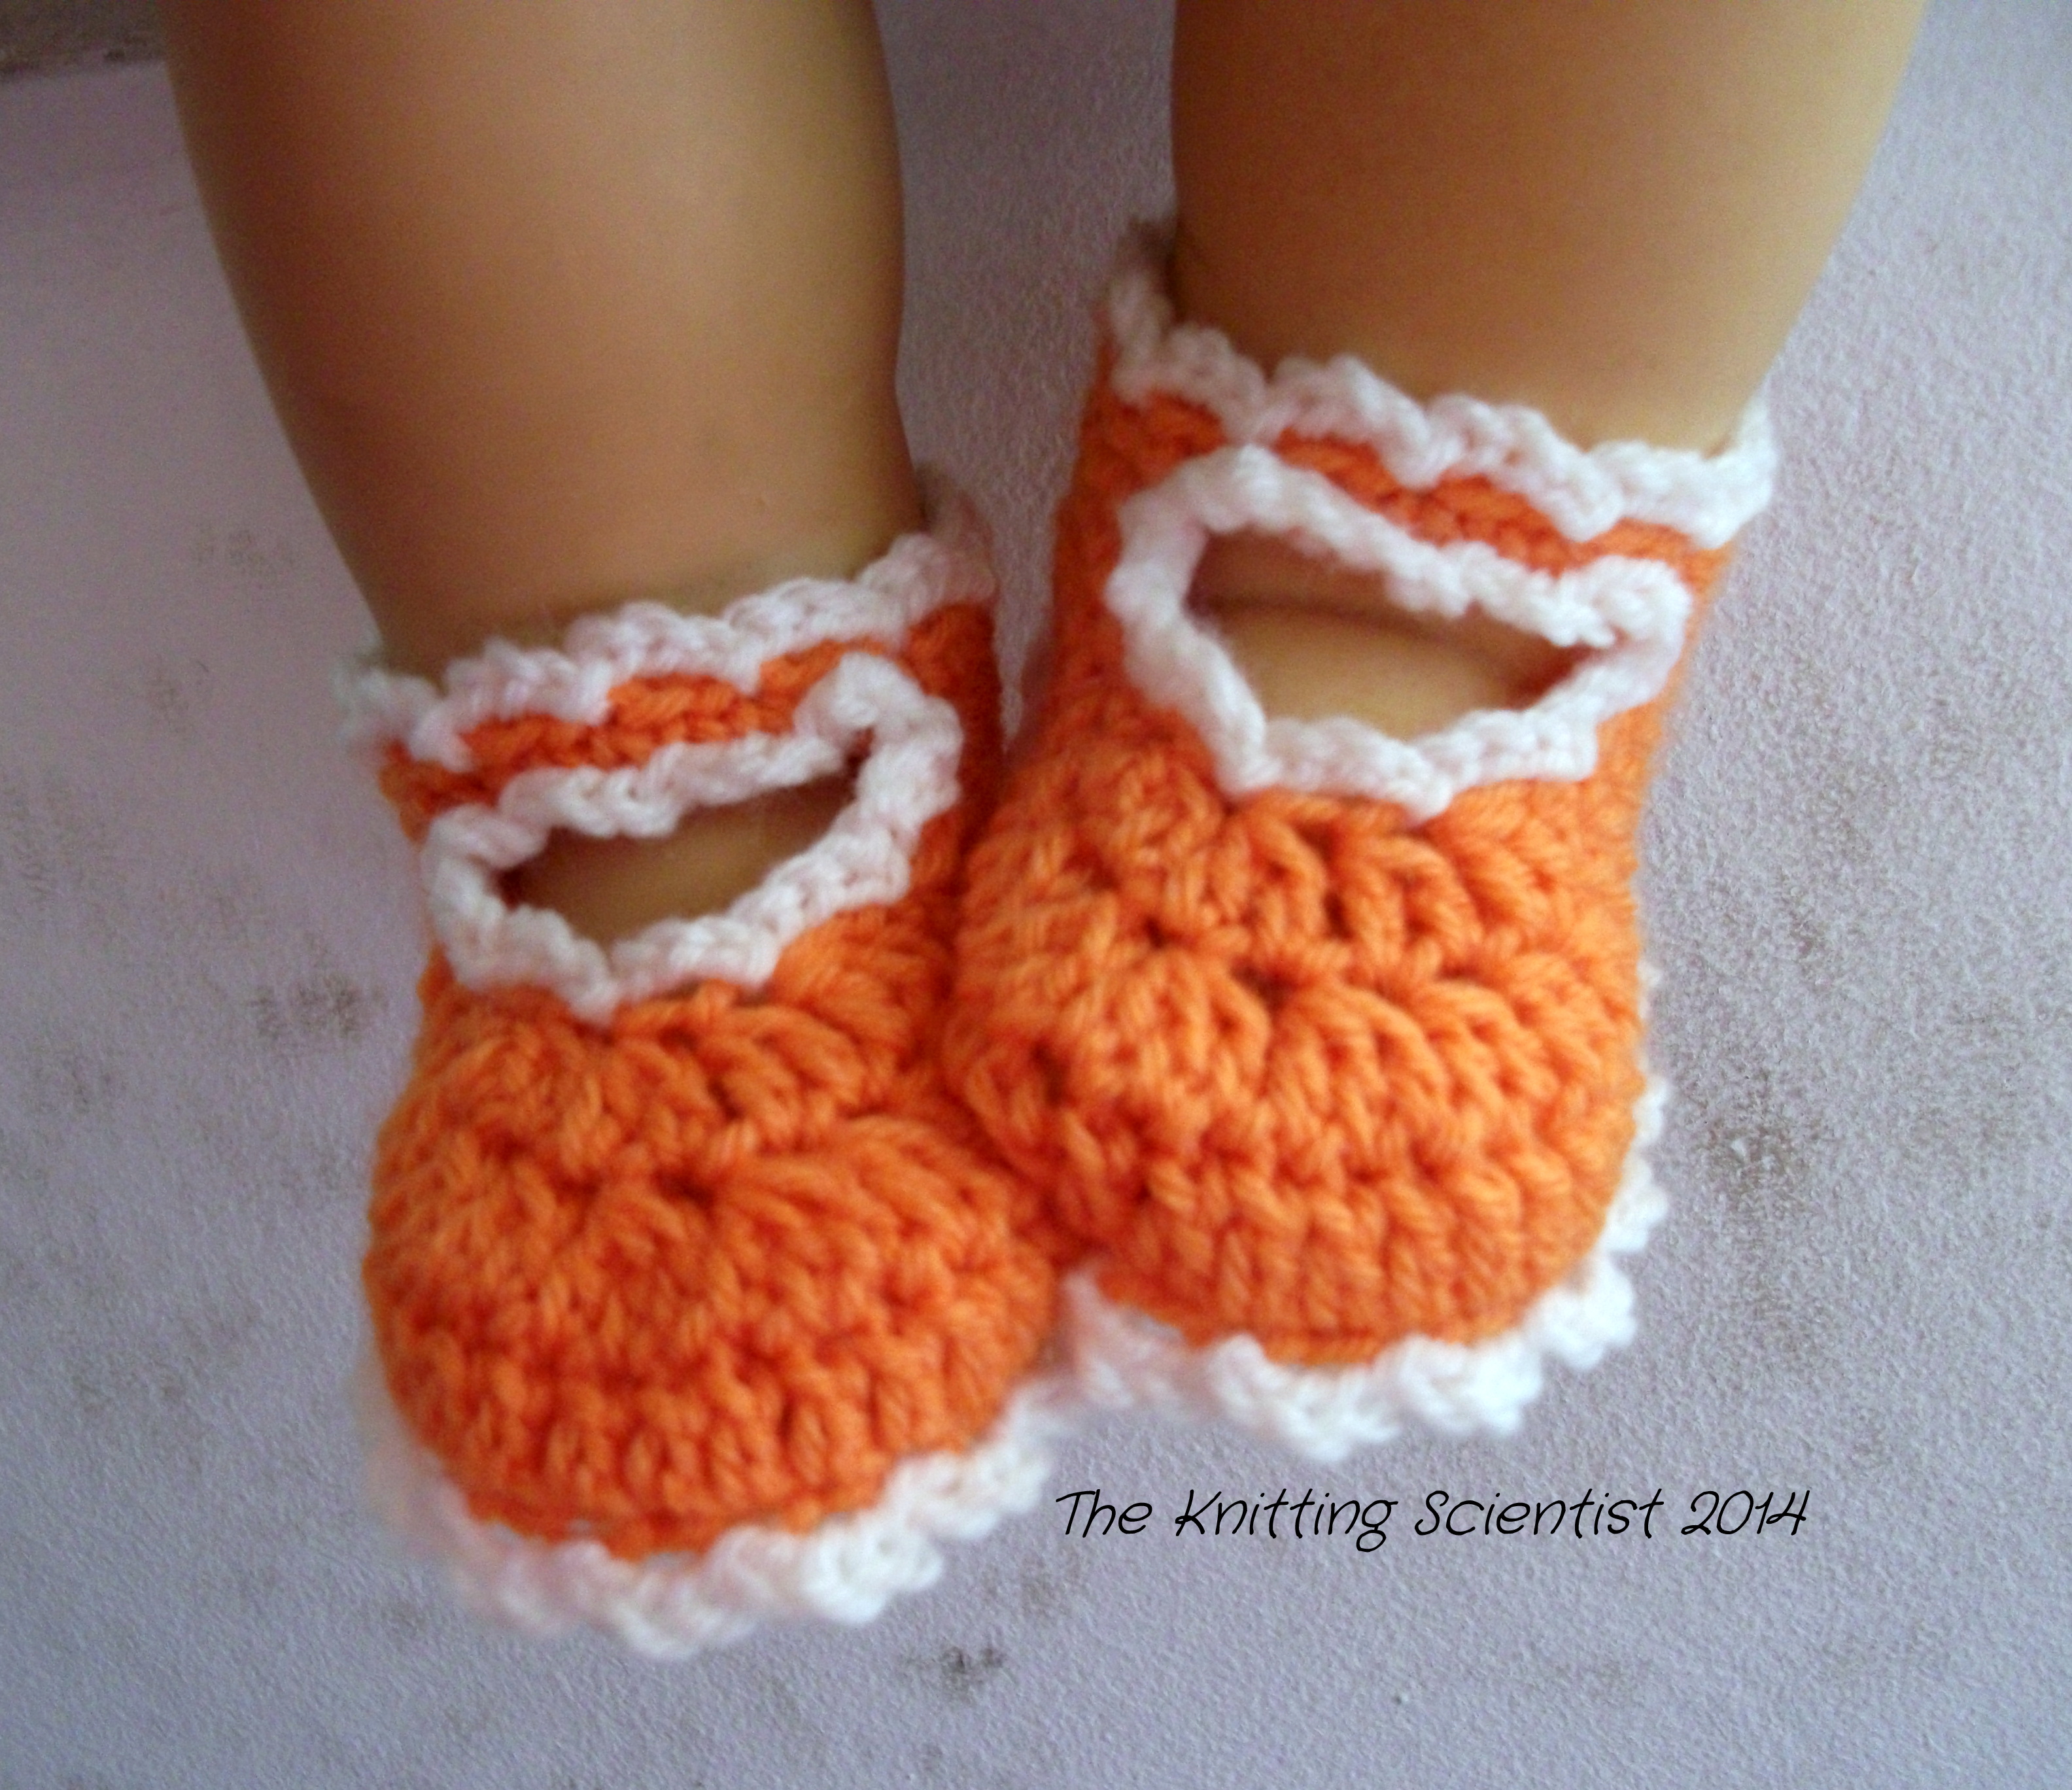 10 Free Crochet Patterns for Baby Booties - Easy Crochet Patterns